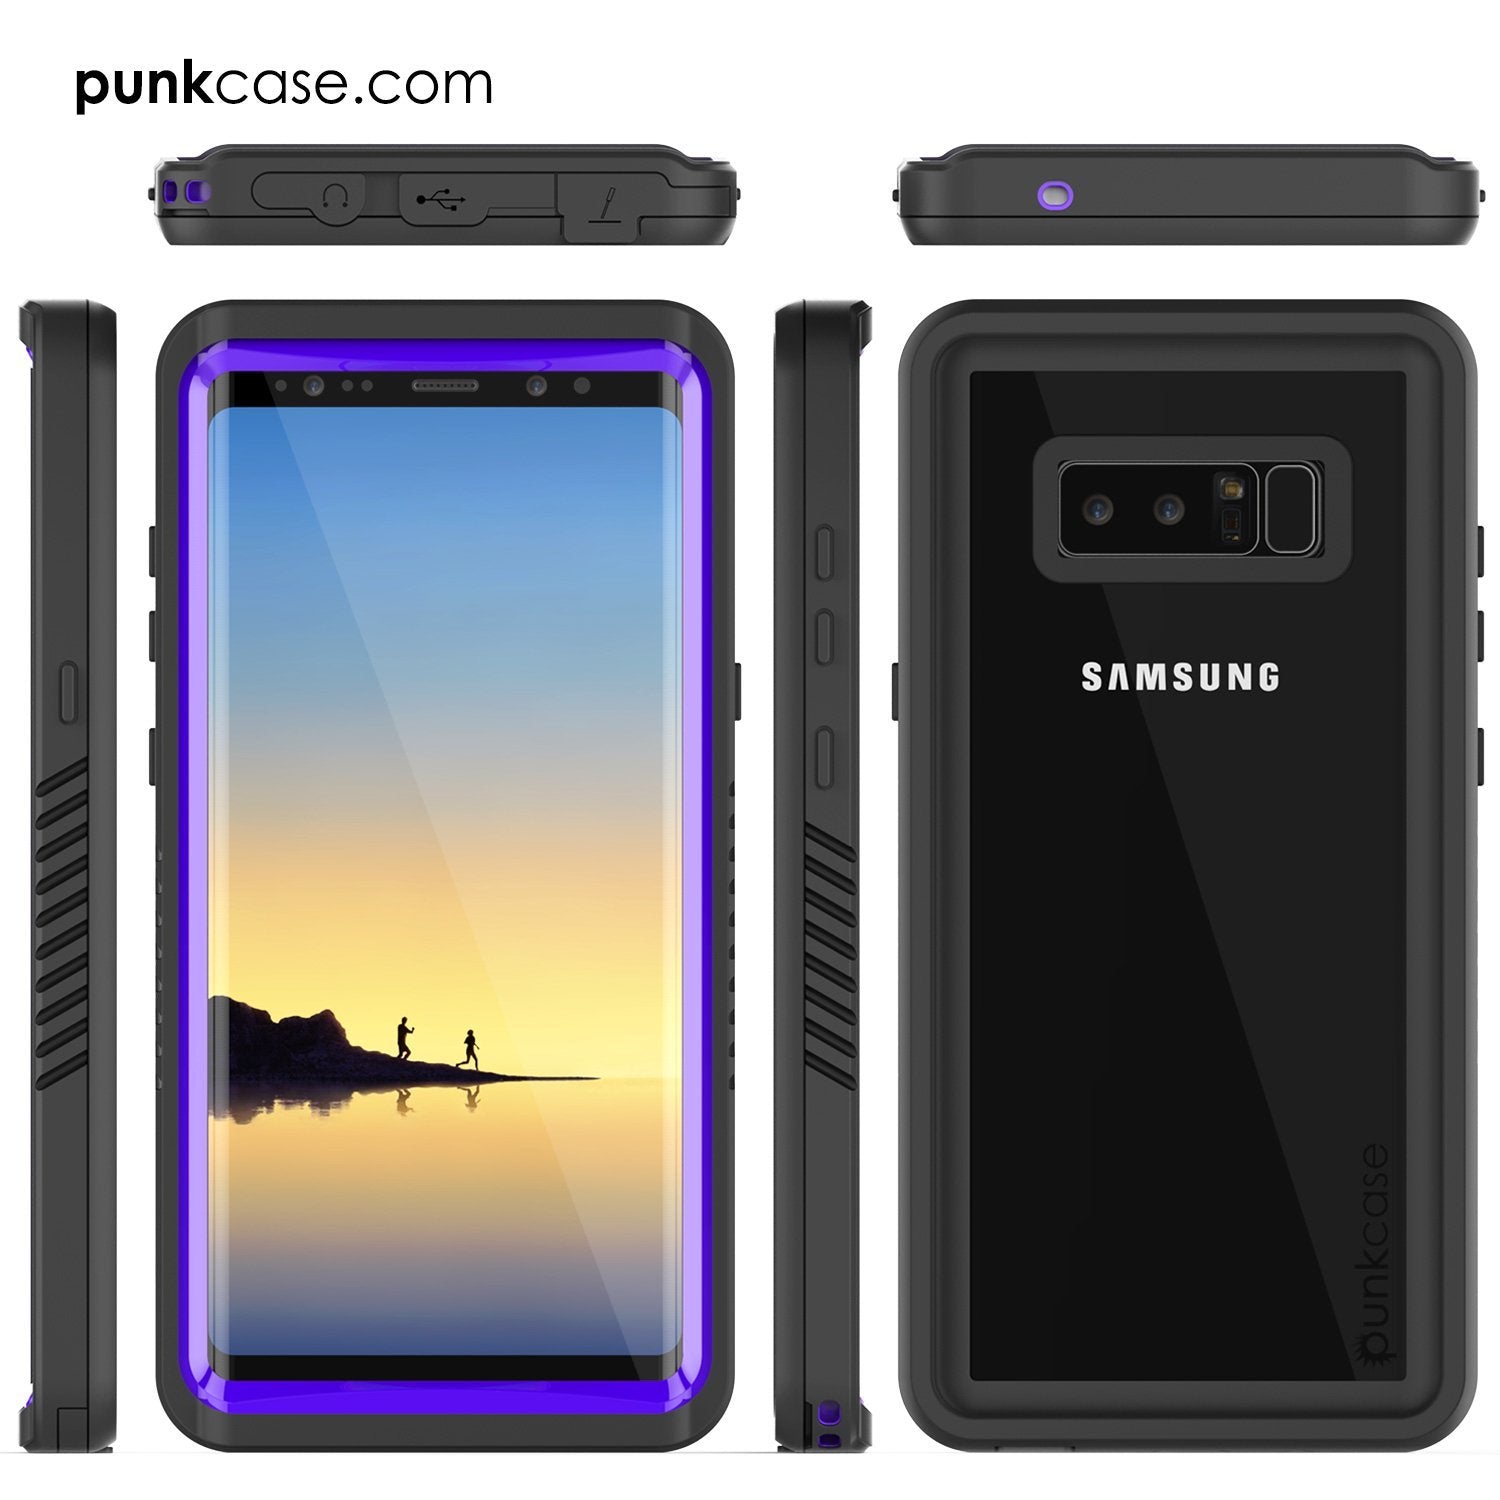 Galaxy Note 8 Case, Punkcase [Extreme Series] [Slim Fit] [IP68 Certified] [Shockproof] Armor Cover W/ Built In Screen Protector [Purple] - PunkCase NZ